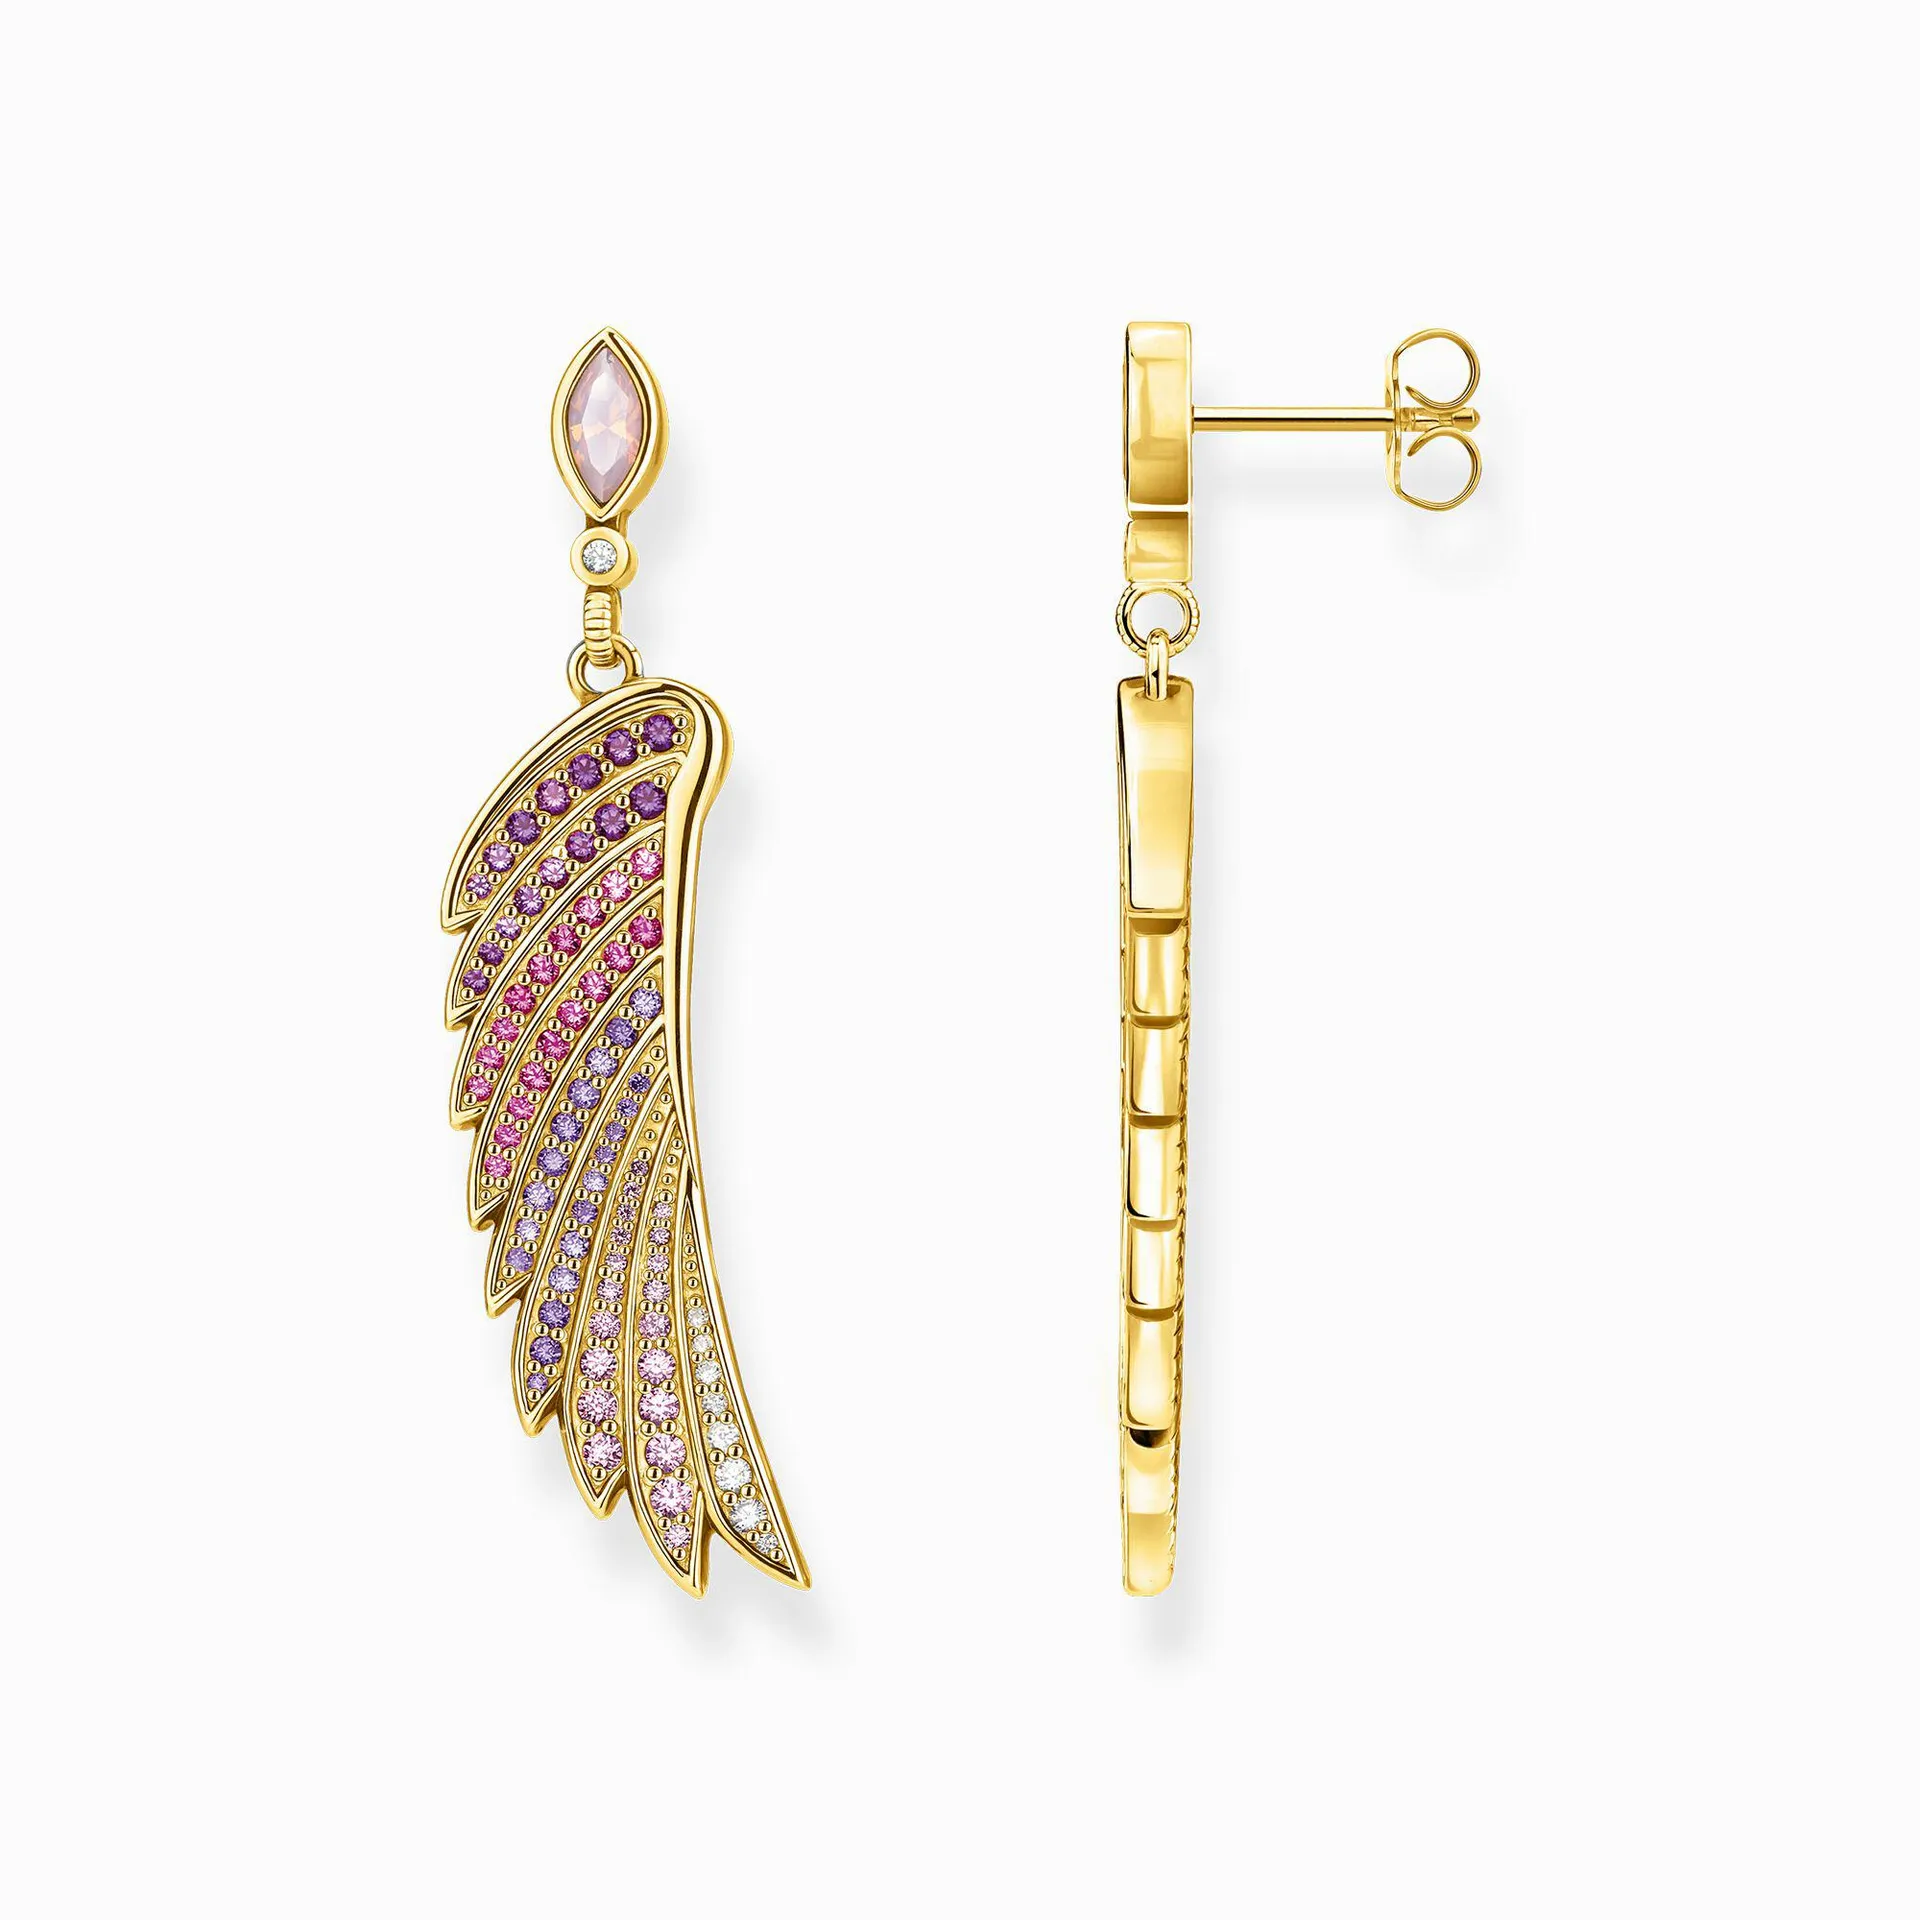 Earrings bright gold-coloured hummingbird wing